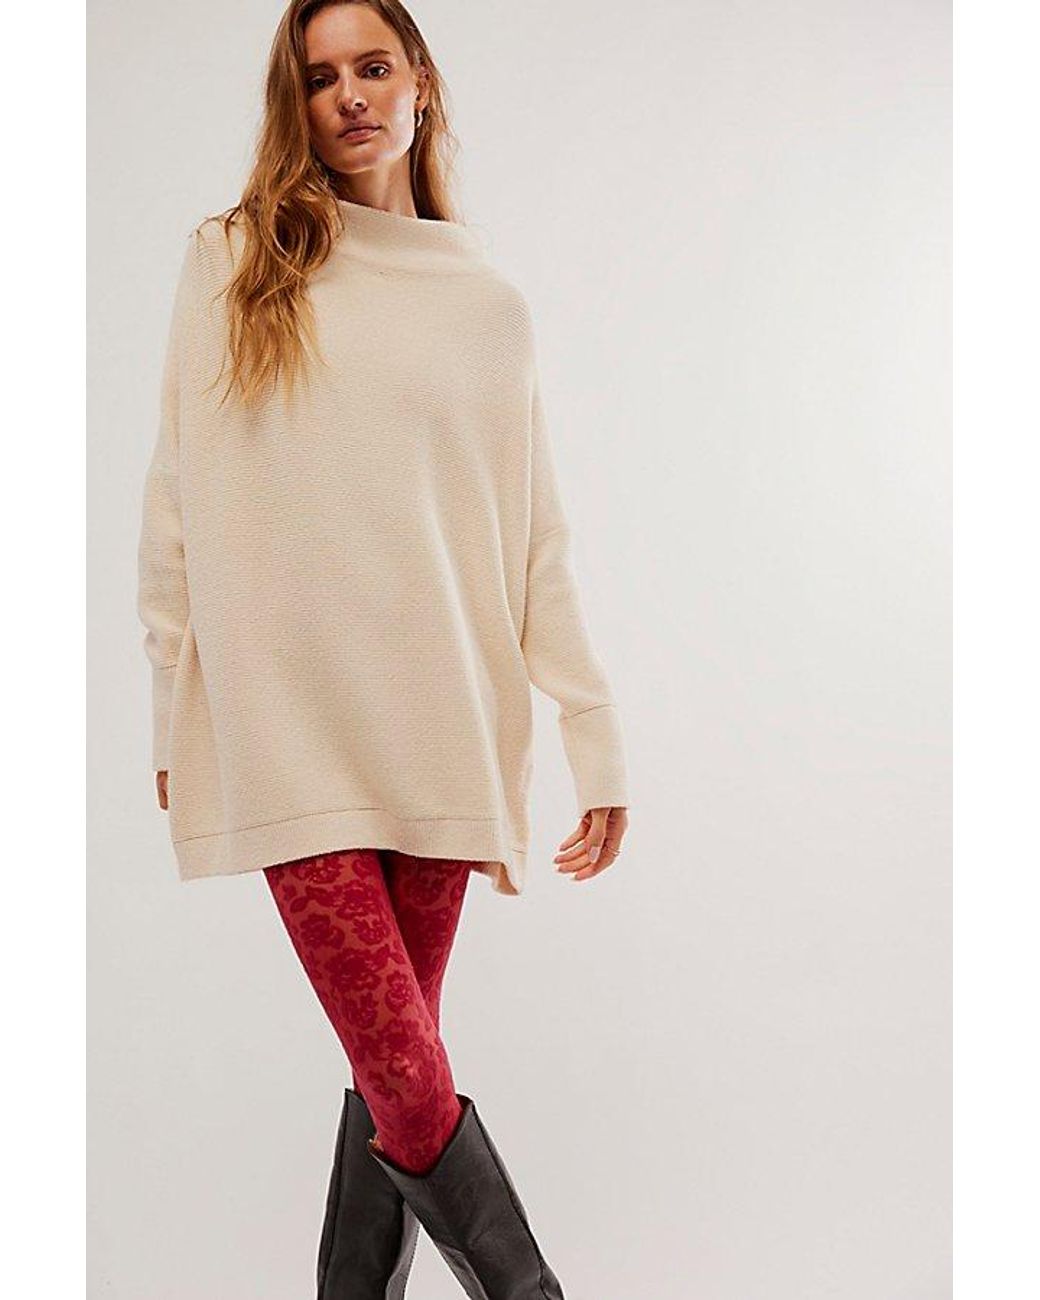 Free People Floral Lace Vine Tights At In Ruby in Red